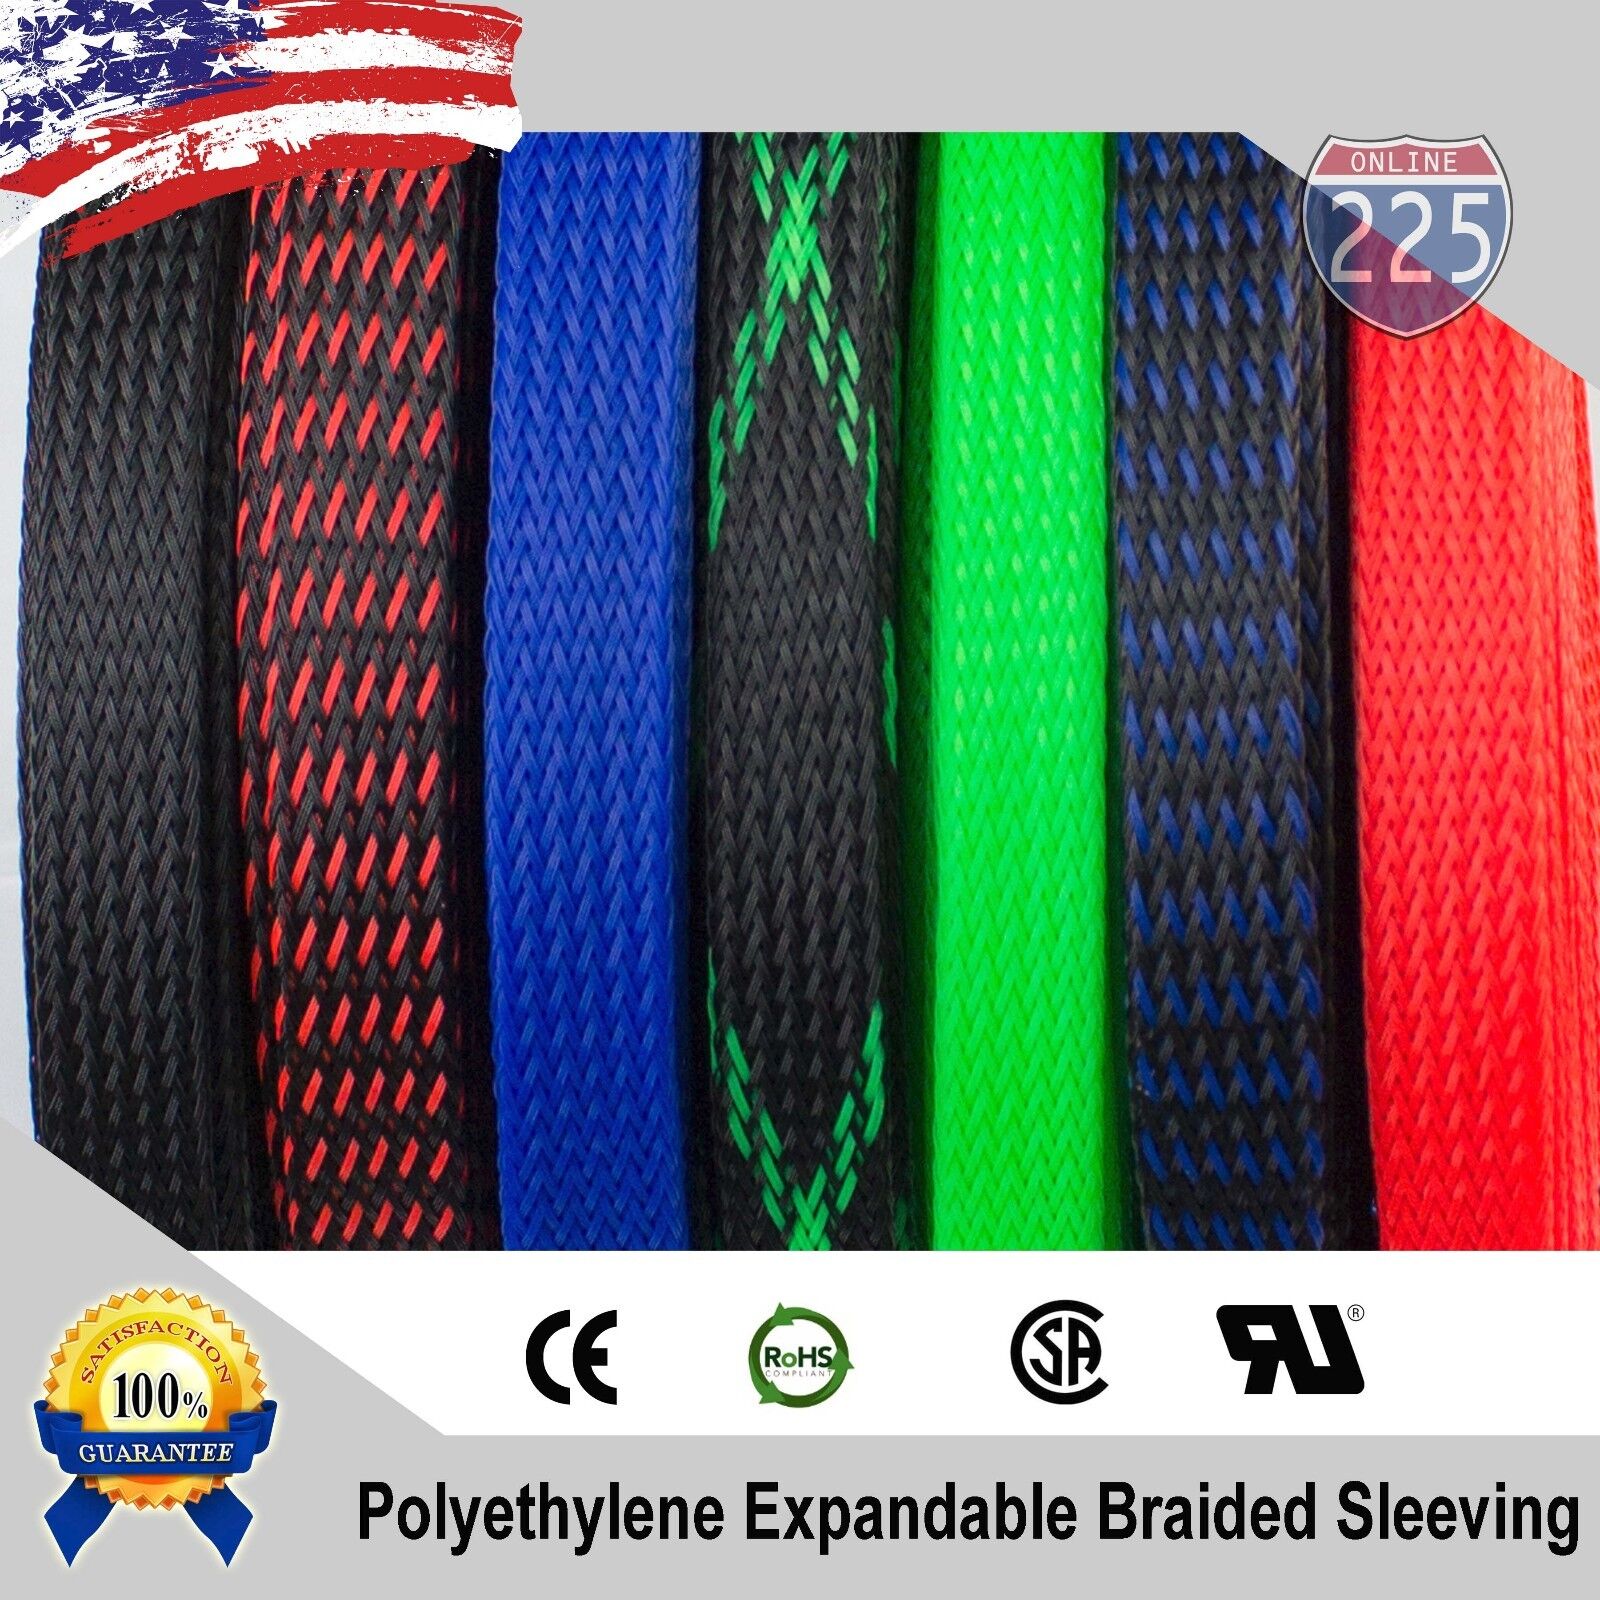 ALL SIZES & COLORS 5' FT - 100 Feet Expandable Cable Sleeving Braided Tubing LOT 225FWY PET flex wire wrap harness cover